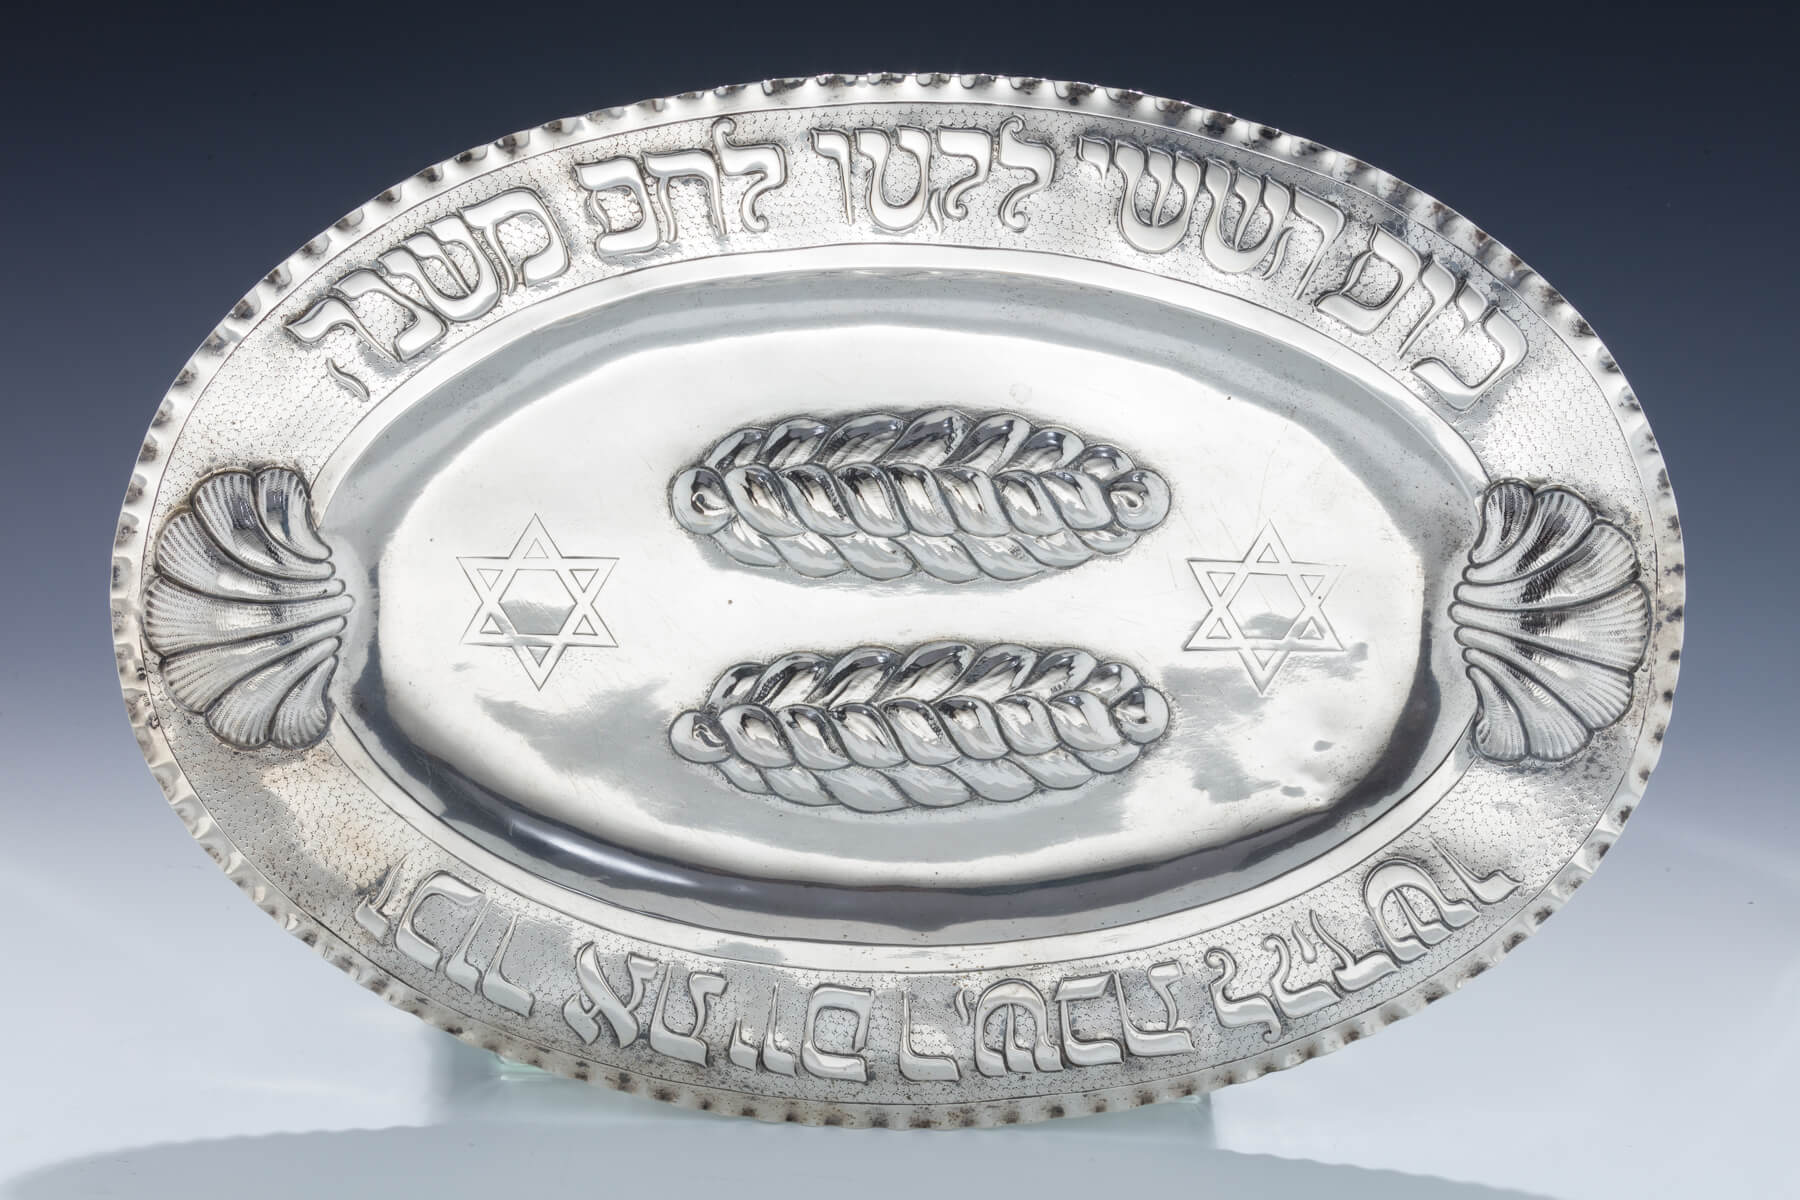 064. A Large Silver Challah Tray